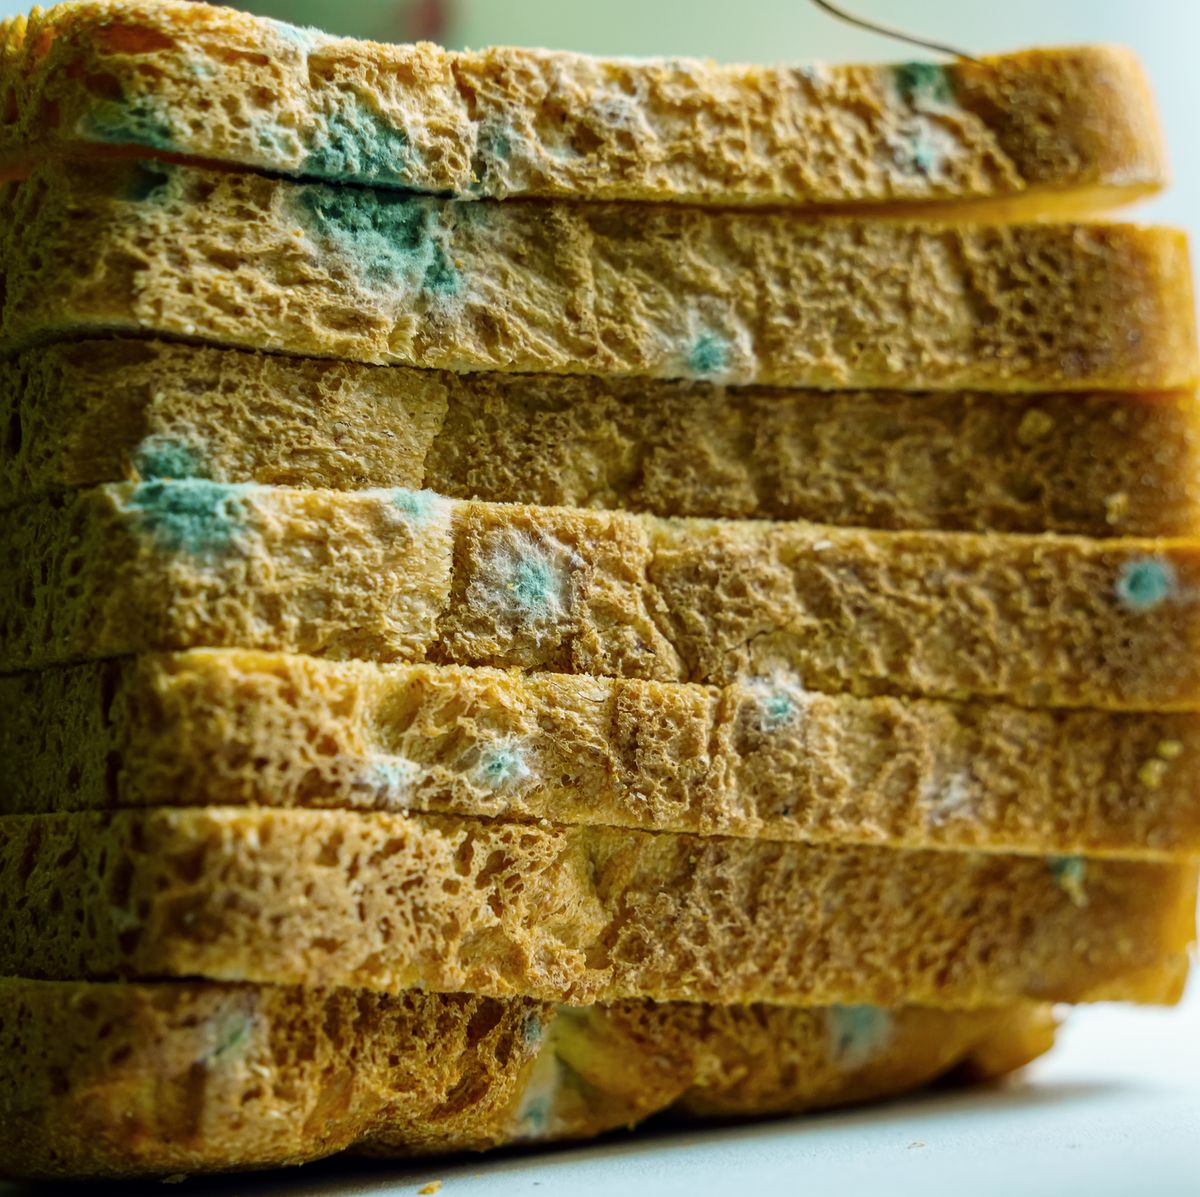 Why Picking Mold Off Bread And Eating The Rest Is Unsafe - Moldy